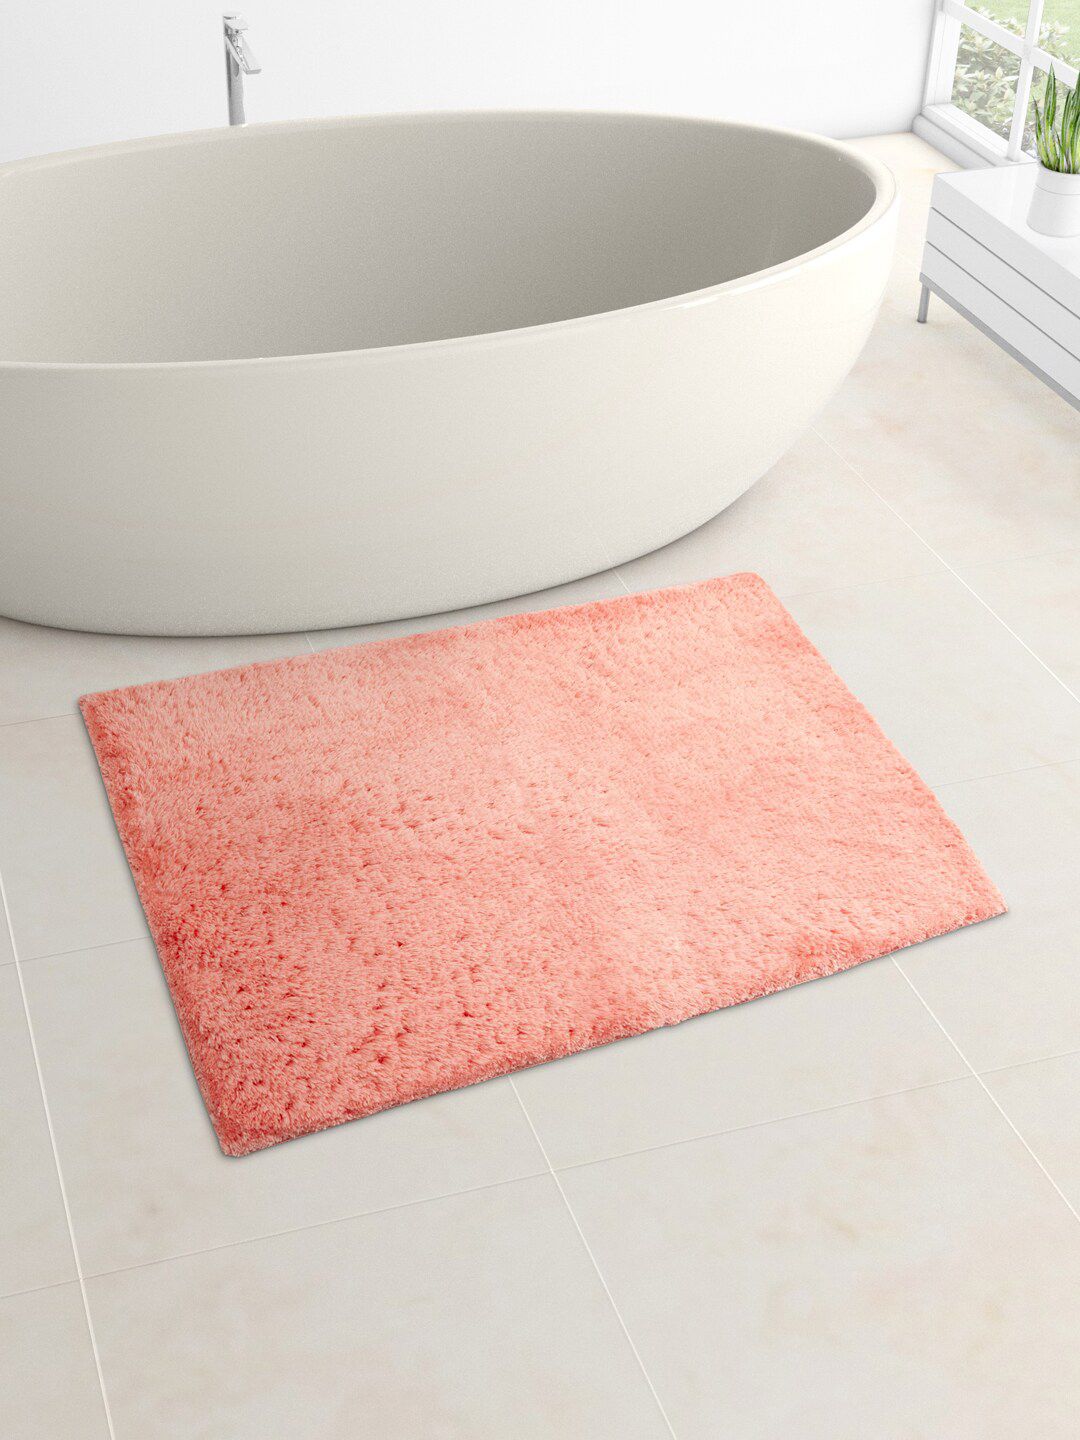 Living scapes by Pantaloons Peach-Coloured Textured Pure Cotton 1600 GSM Bath Rug Price in India